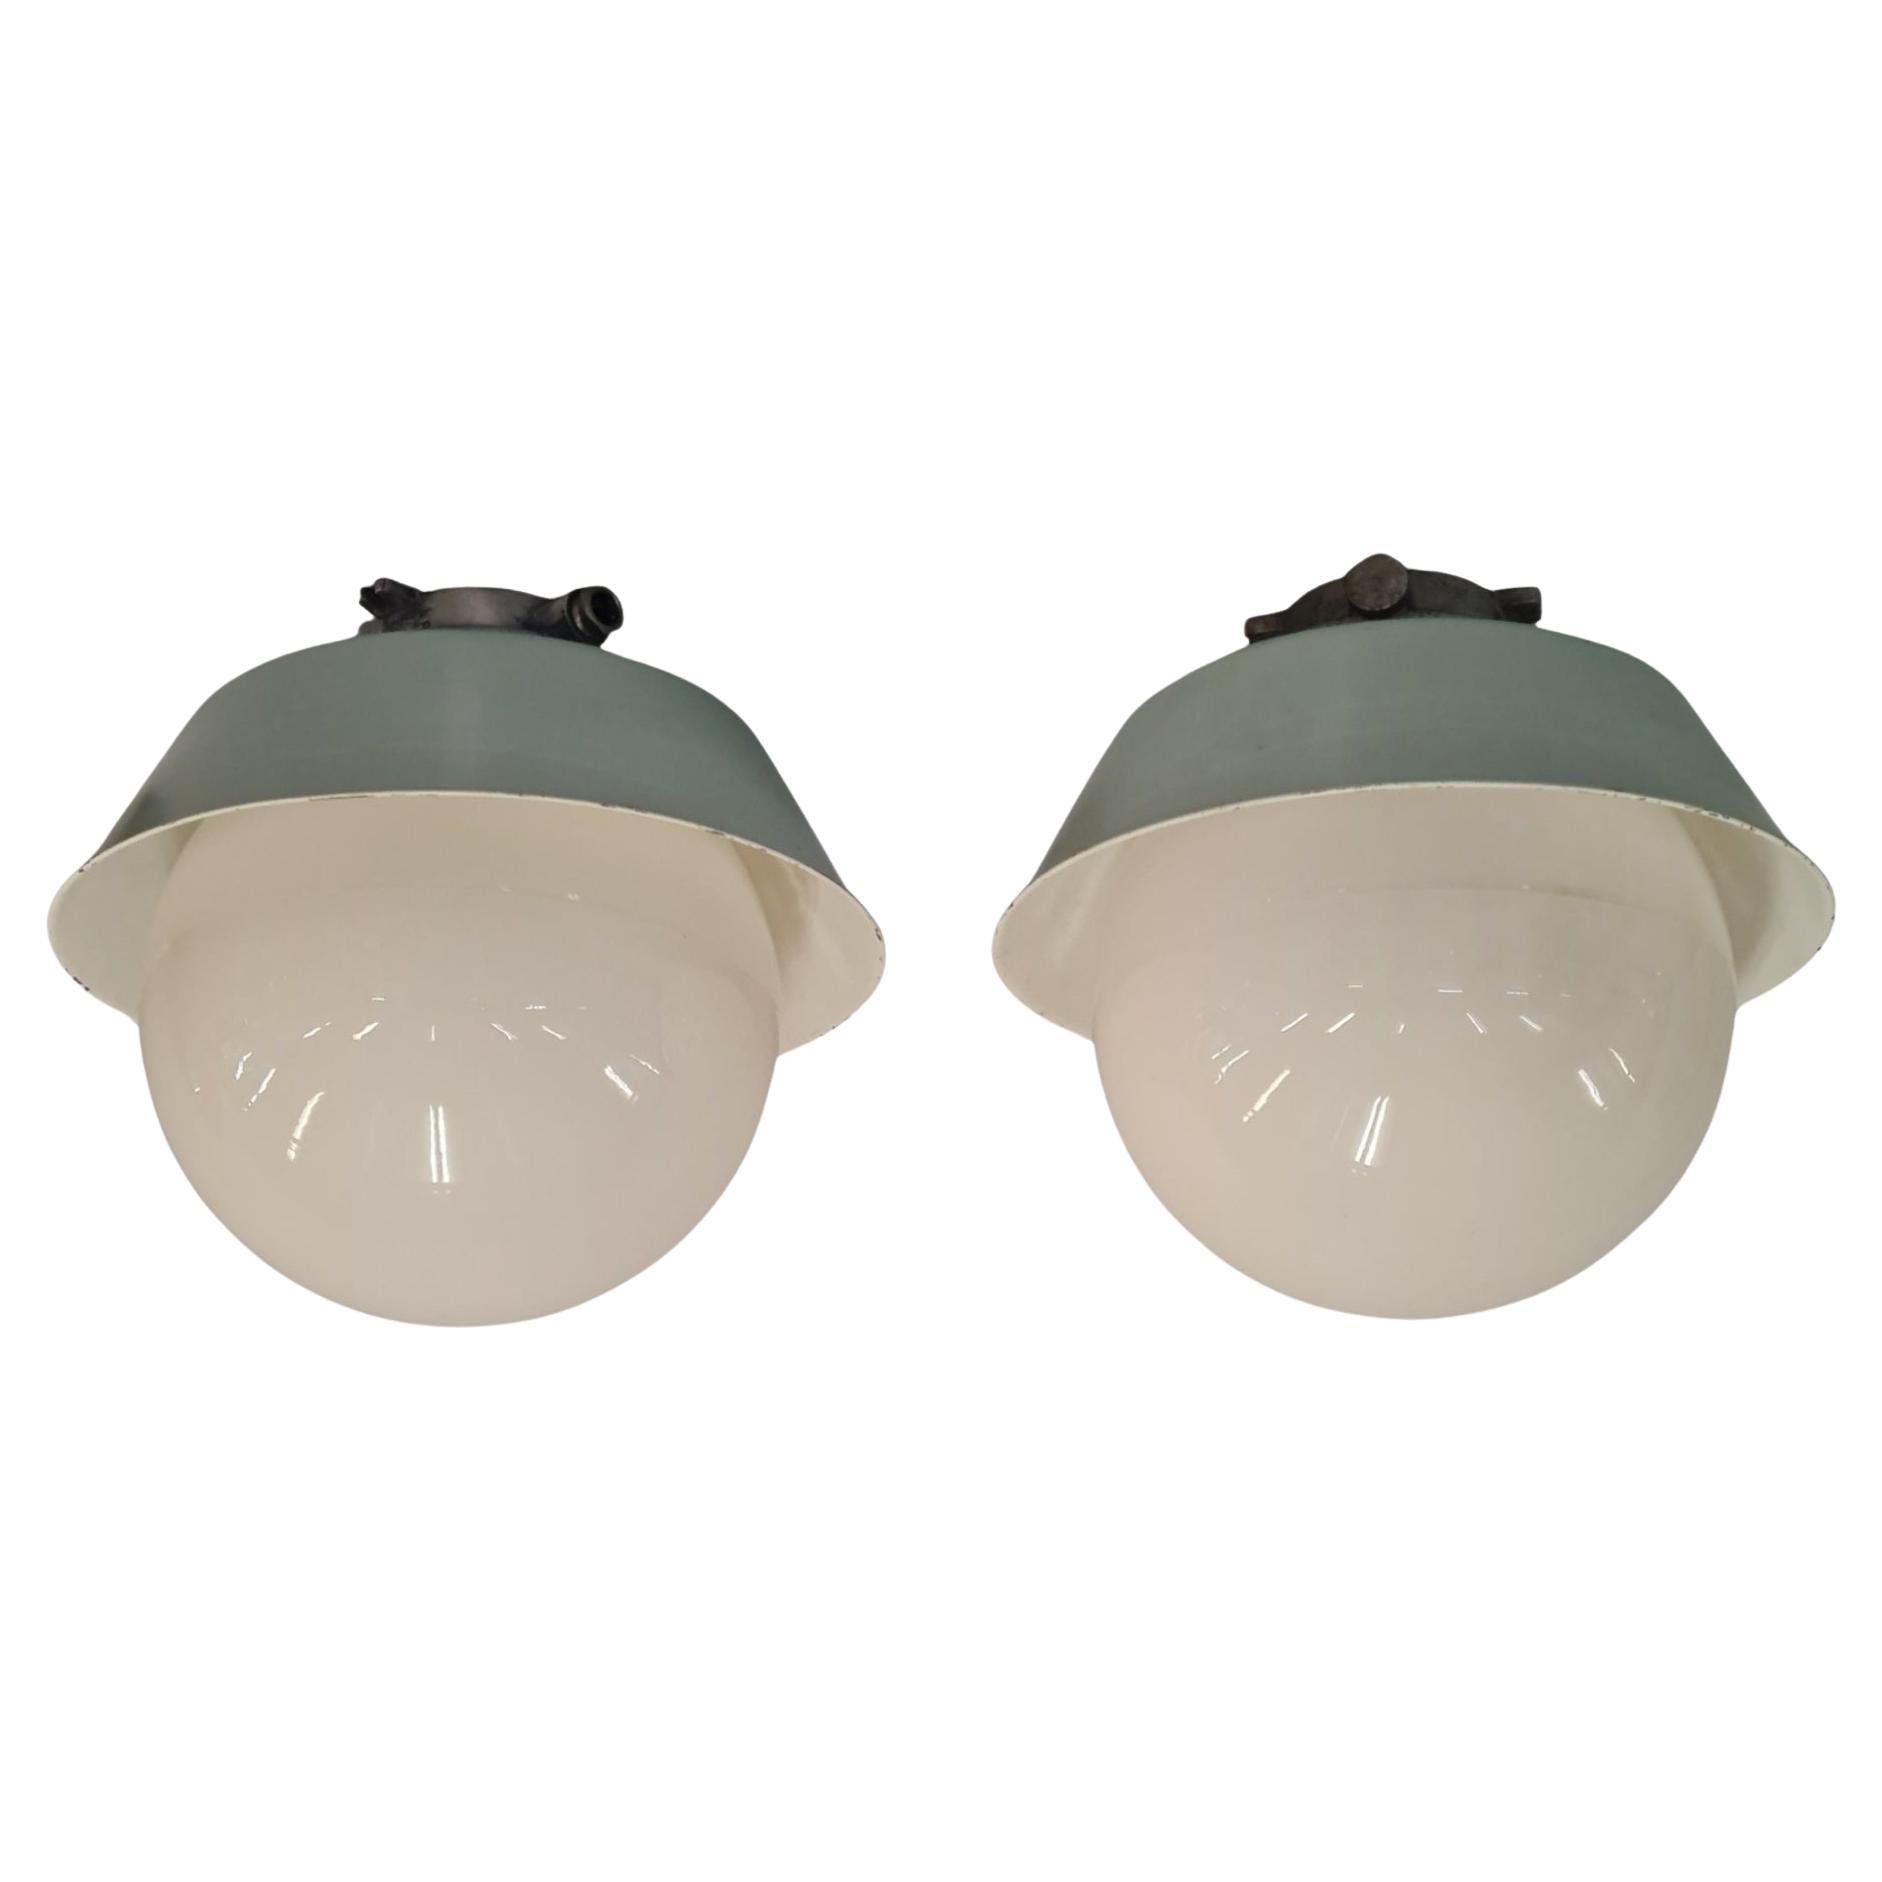 A Pair of Sizeable Paavo Tynell Outdoor/Indoor Industrial style lamps for Idman